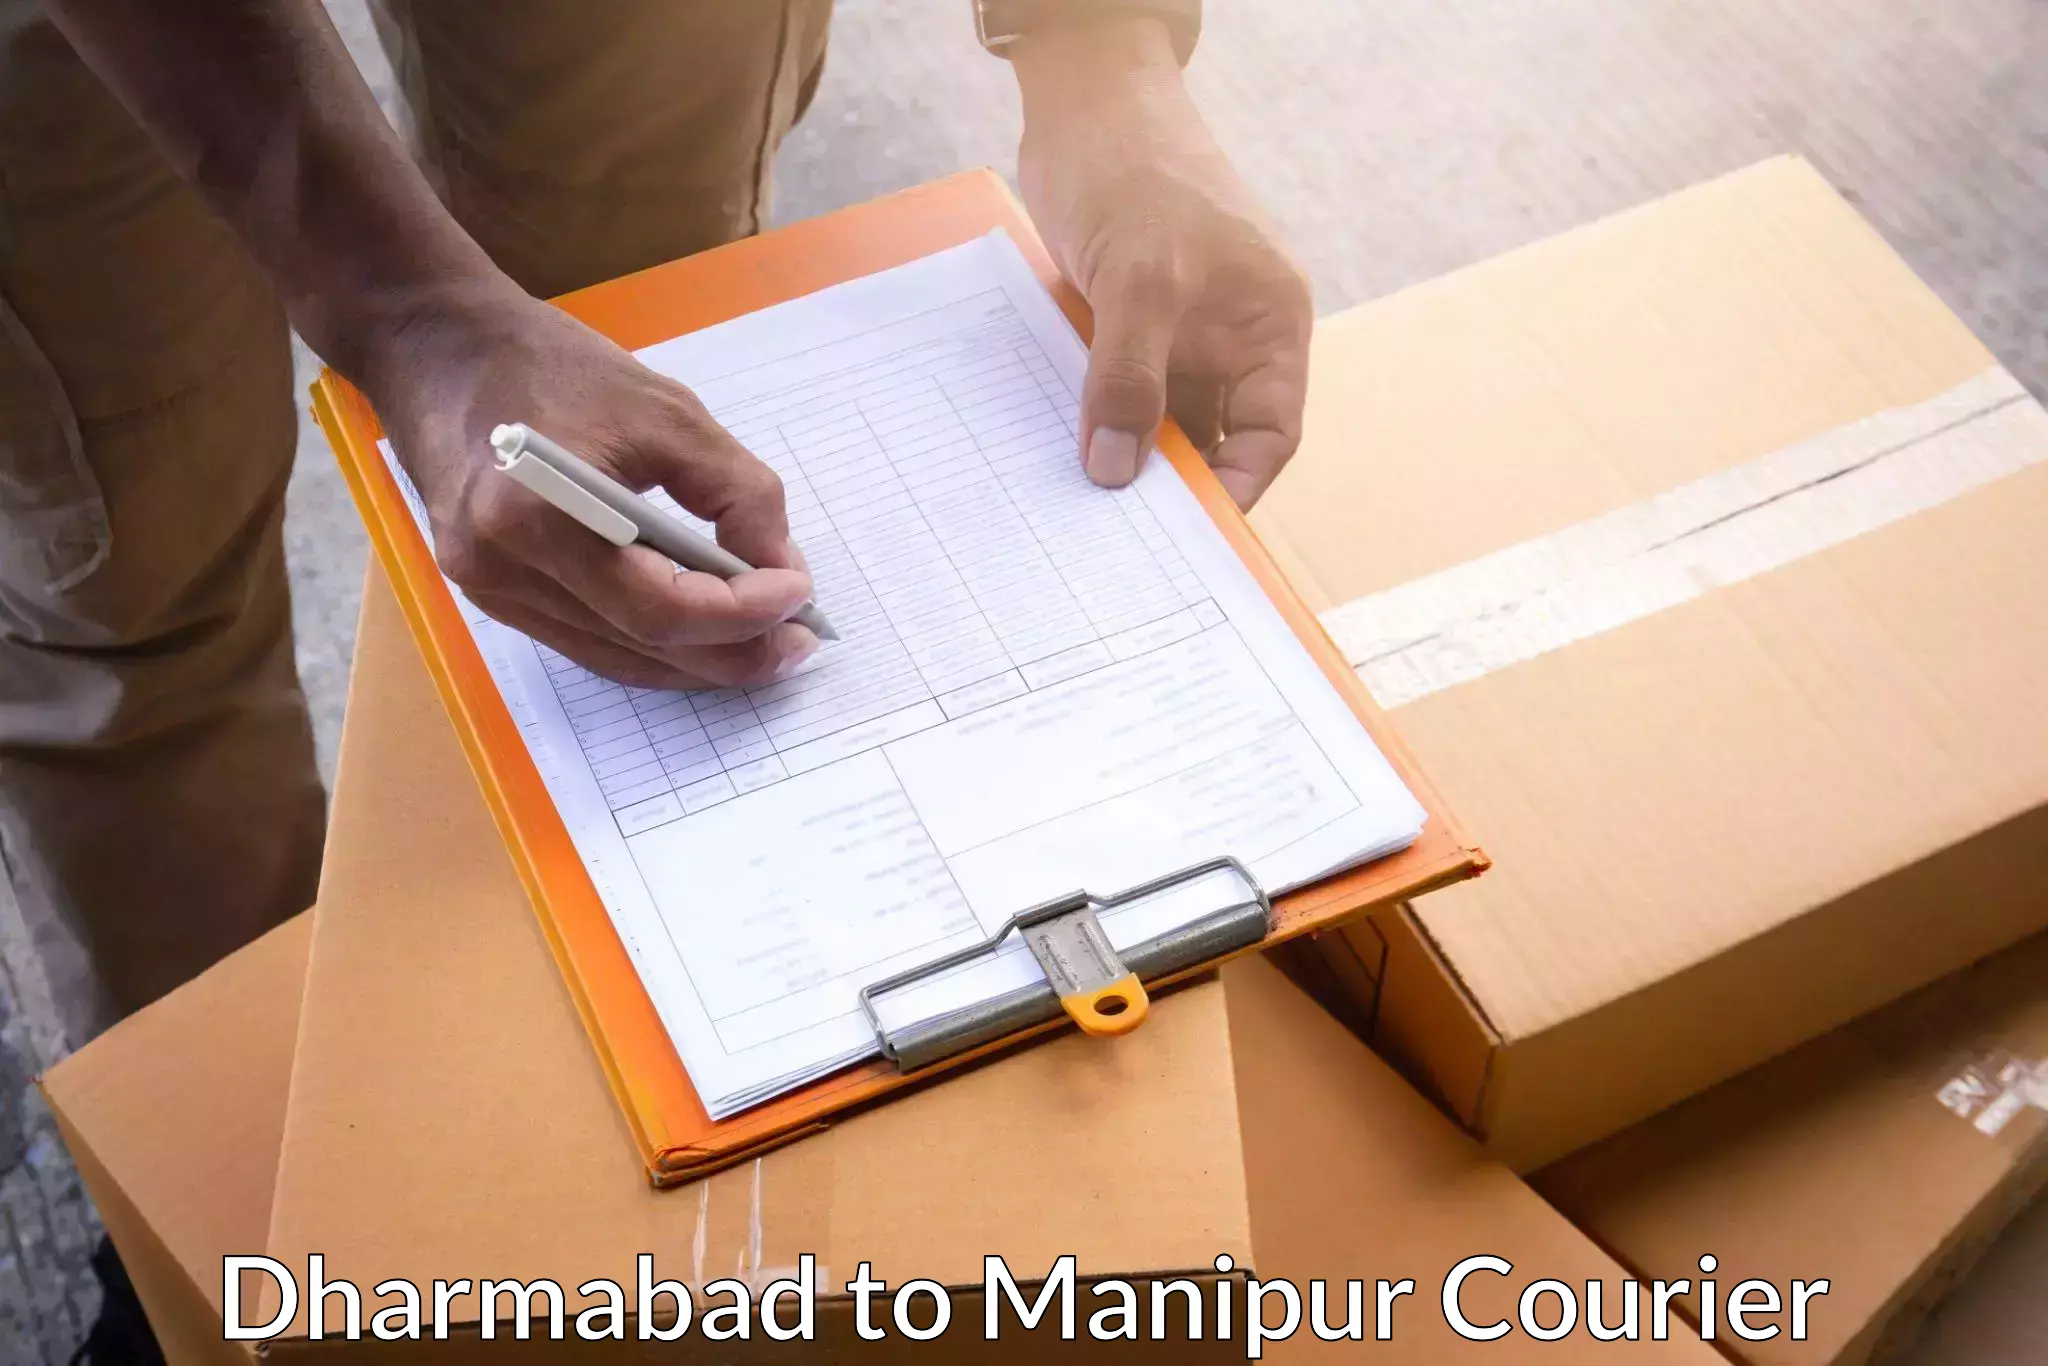 Global shipping networks Dharmabad to Manipur